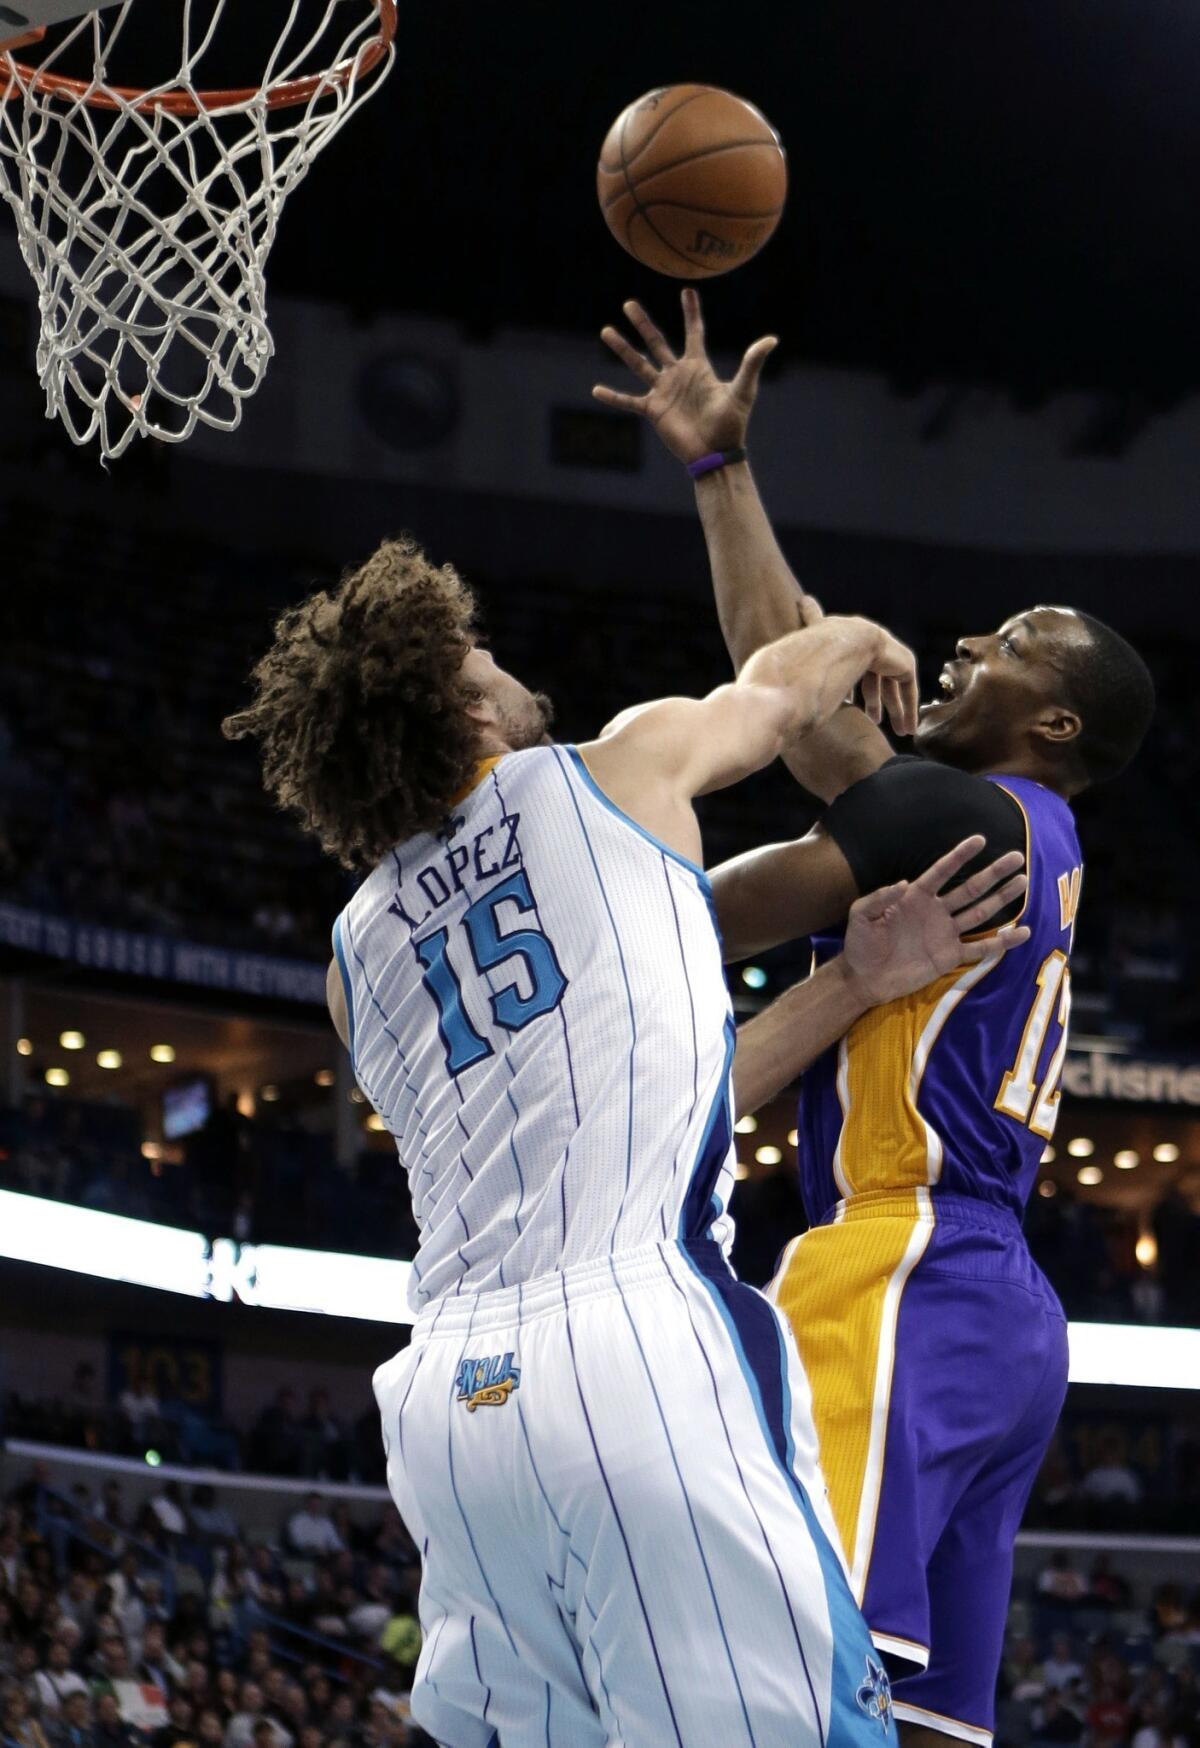 Lakers center Dwight Howard powers a shot past Hornets center Robin Lopez.